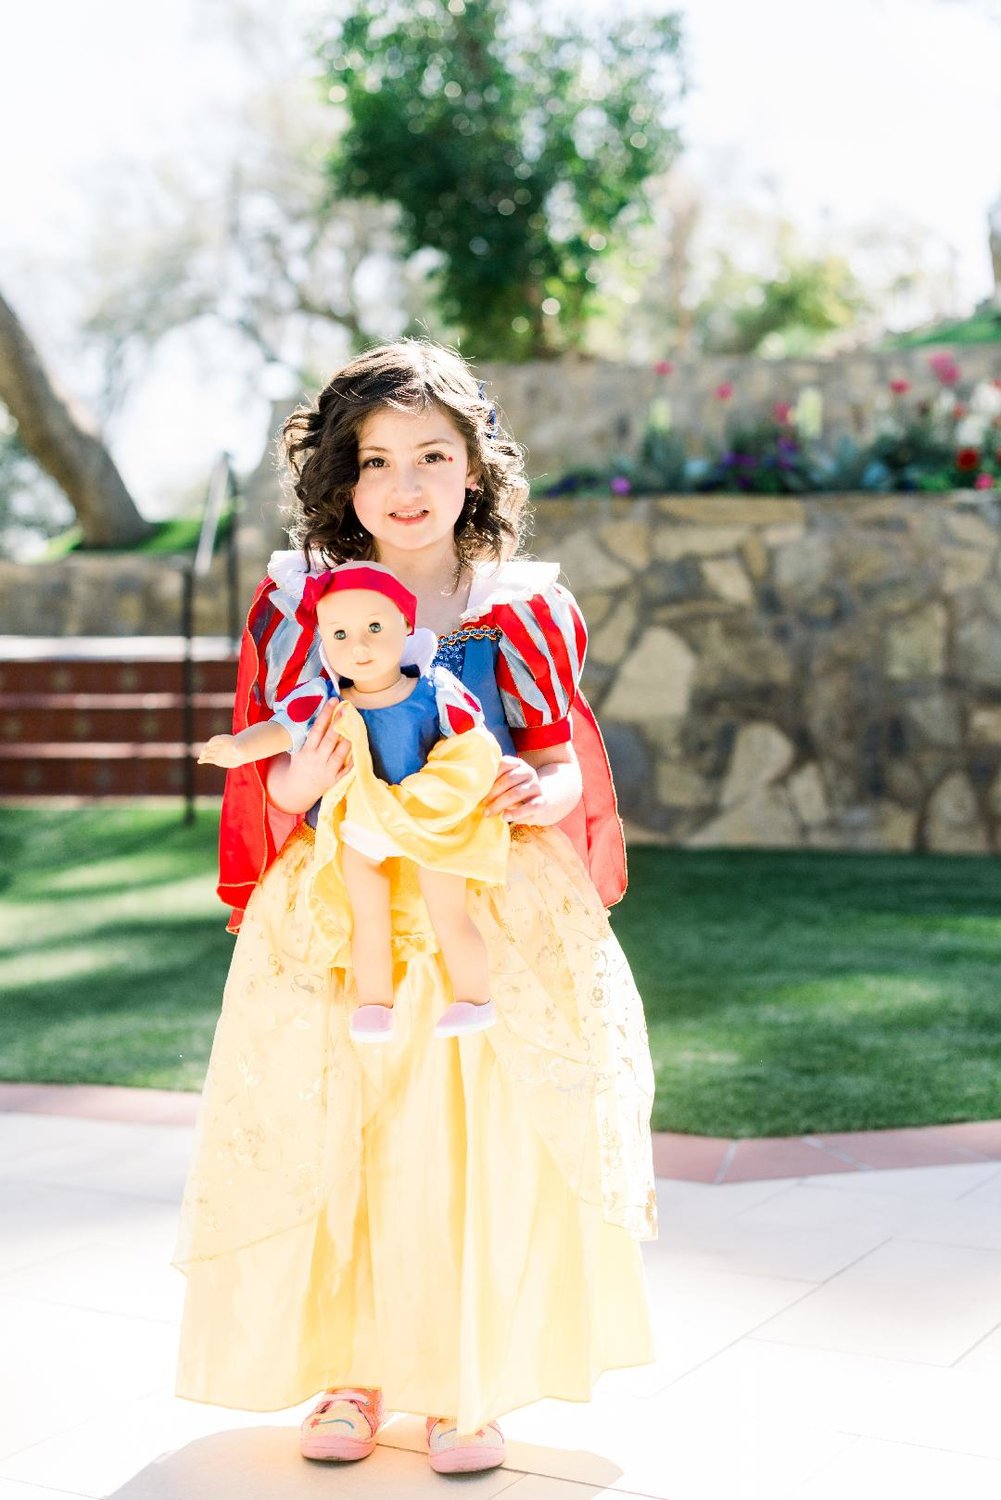 FOREVER A PRINCESS: Little Snow White is Olivia Garcia at one of our “Best Day Ever” photoshoots in Arizona. (Photo courtesy of the Glimmer of Hope Foundation)